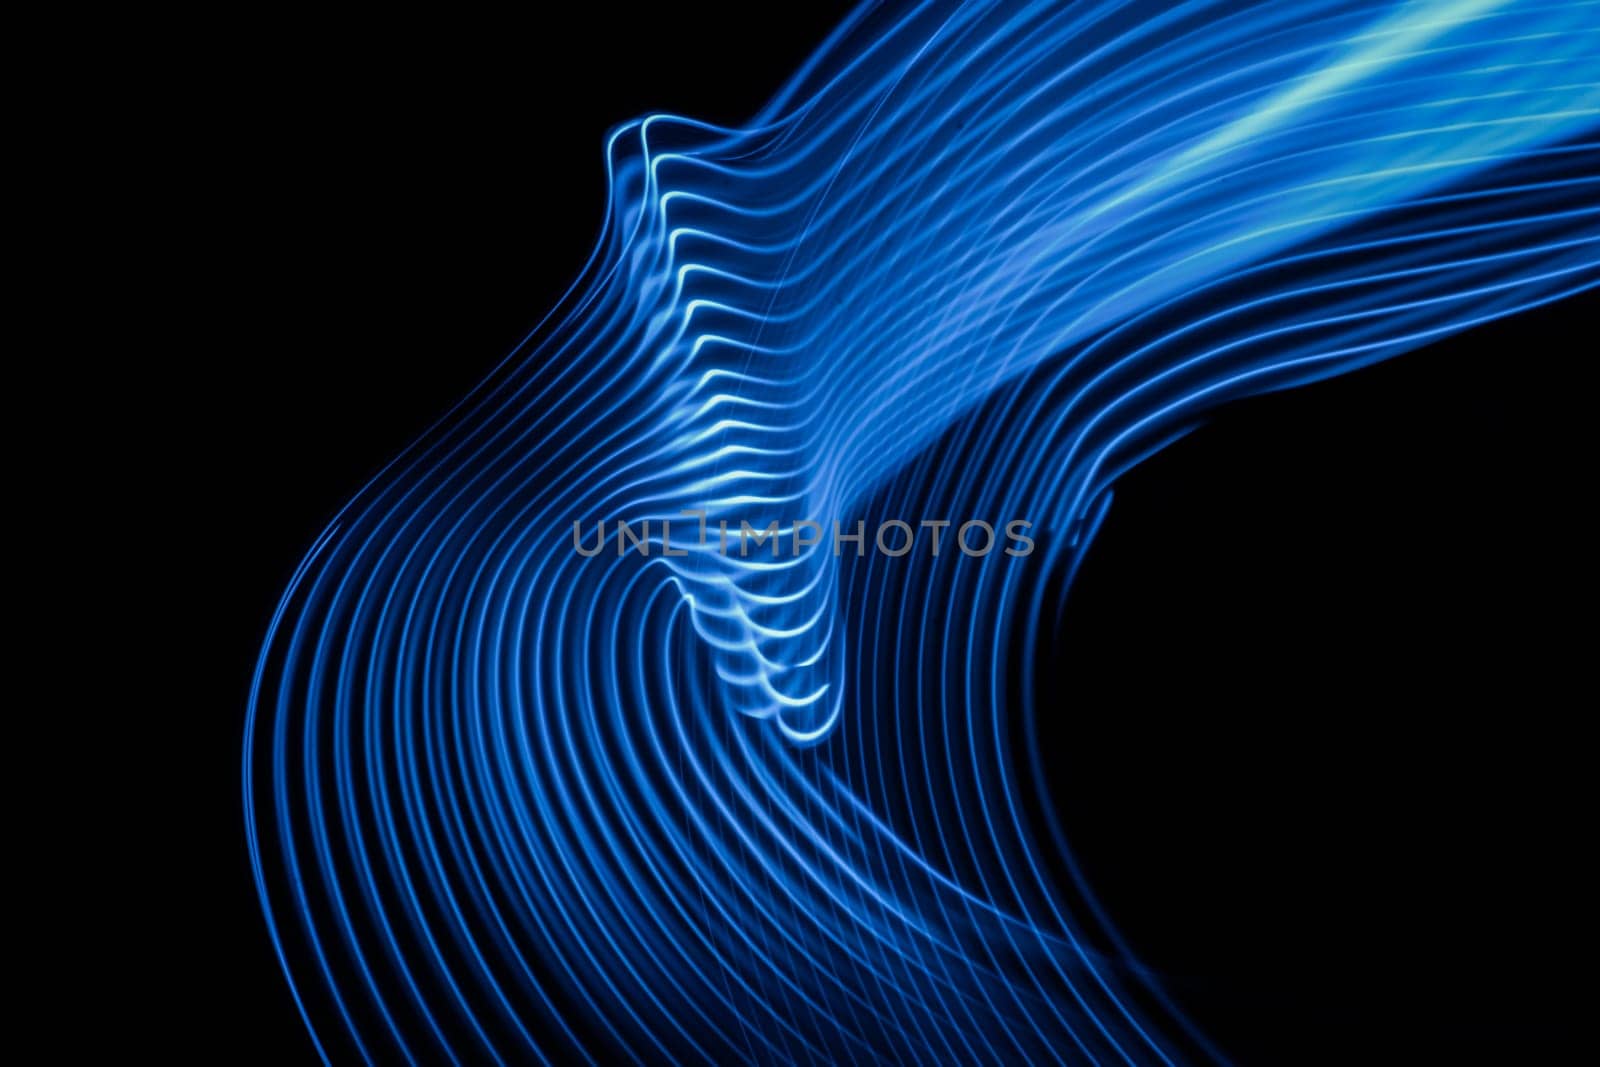 Abstract technology background of long exposure neon light stripes on black. by PaulCarr